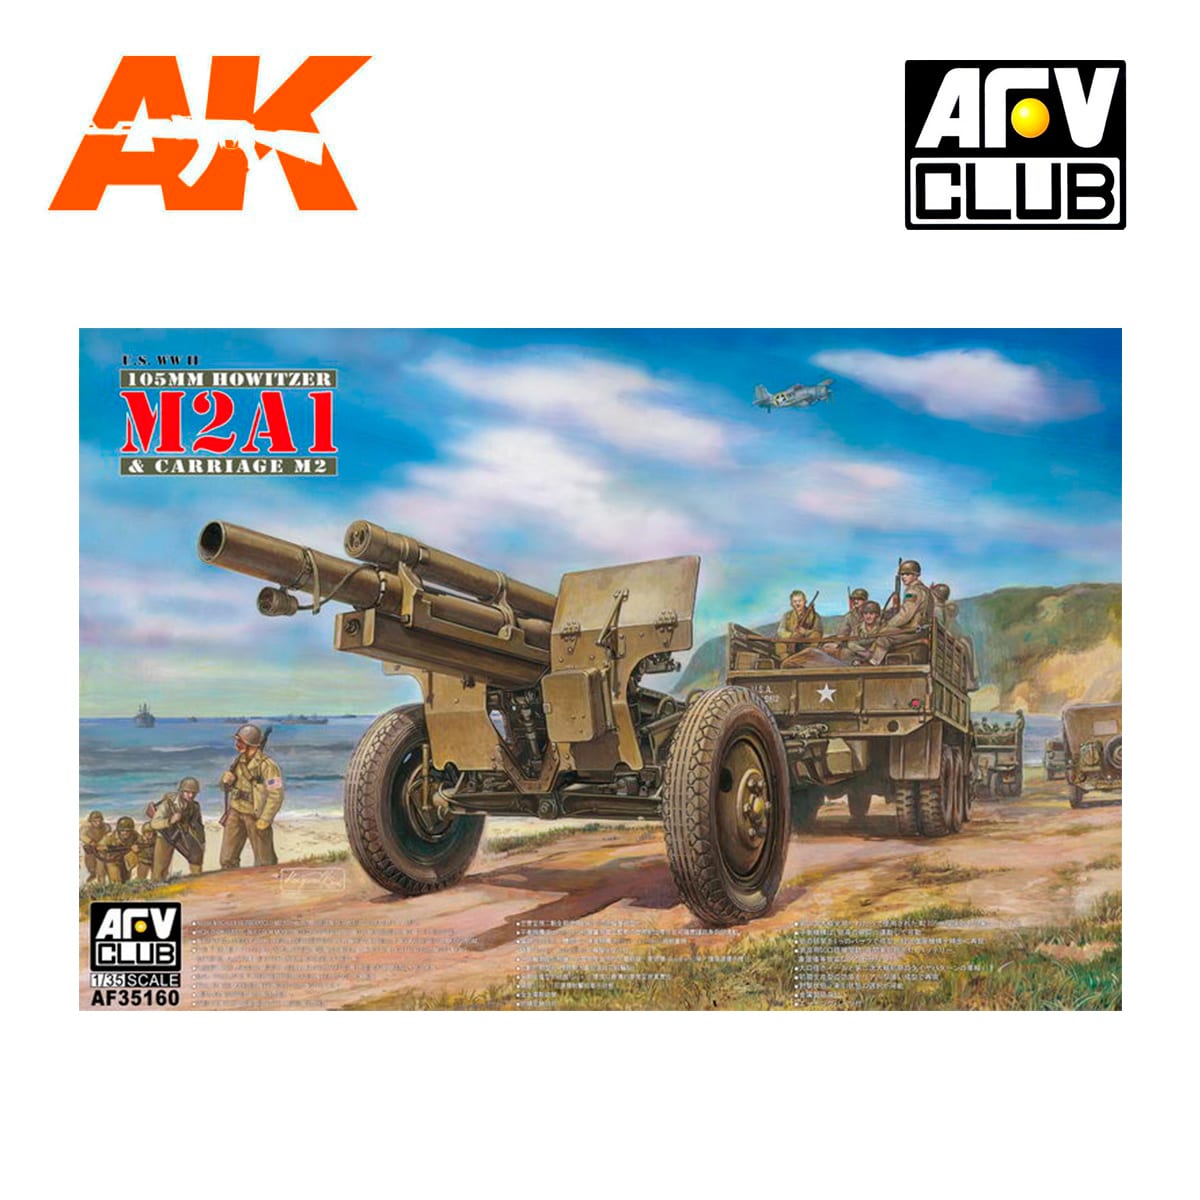 U.S. WWII 105mm HOWITZER M2A1 & CARRIAGE M2 1/35